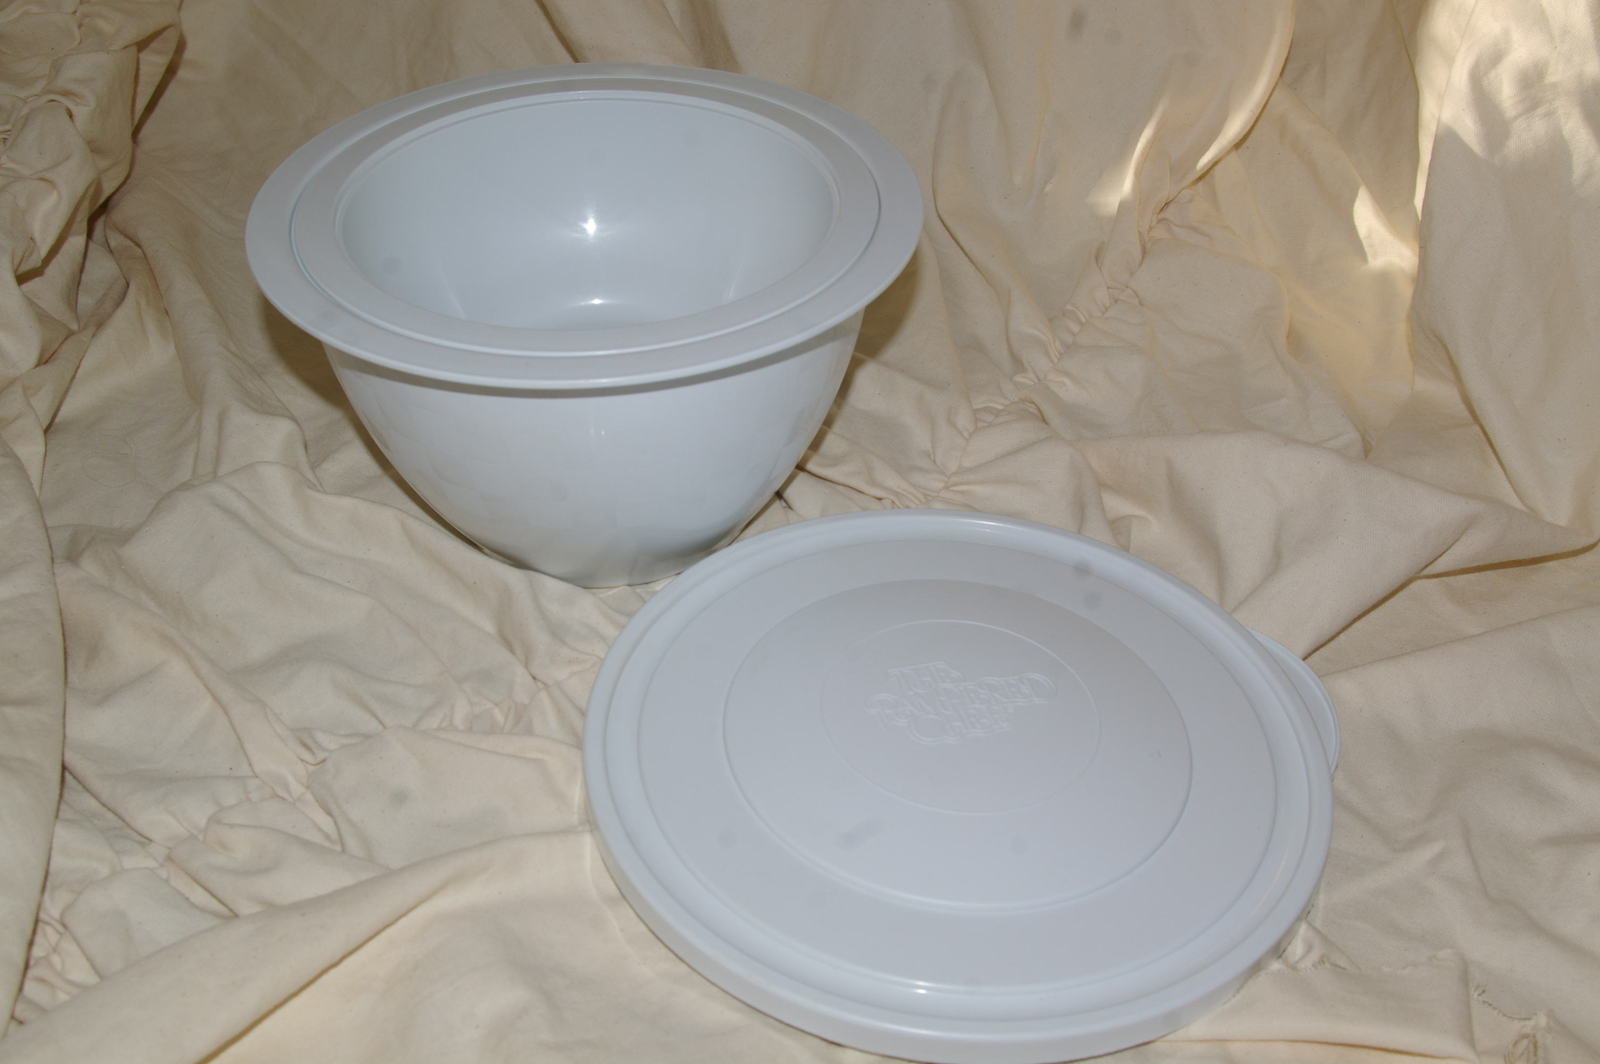 Pampered Chef Bowl and Lid Set - $25.00